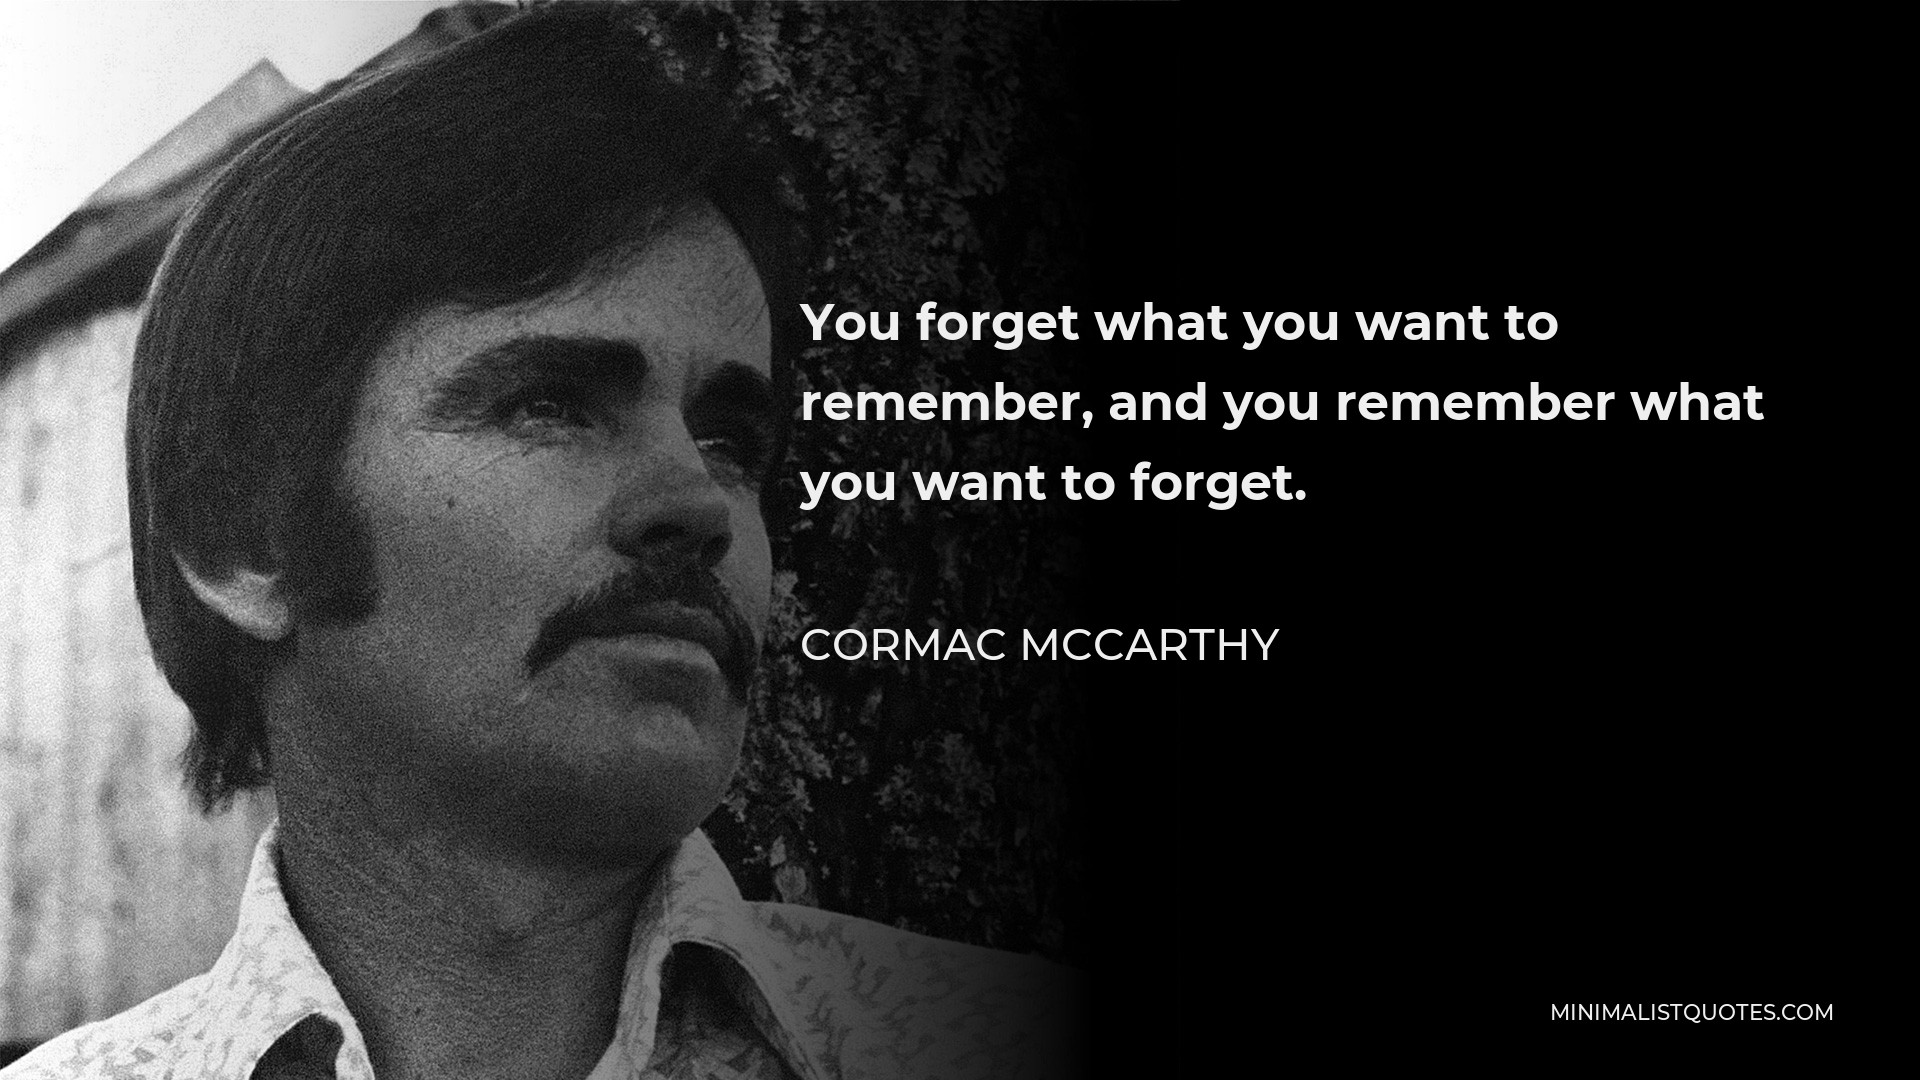 Cormac McCarthy Quote: You forget what you want to remember, and you ...